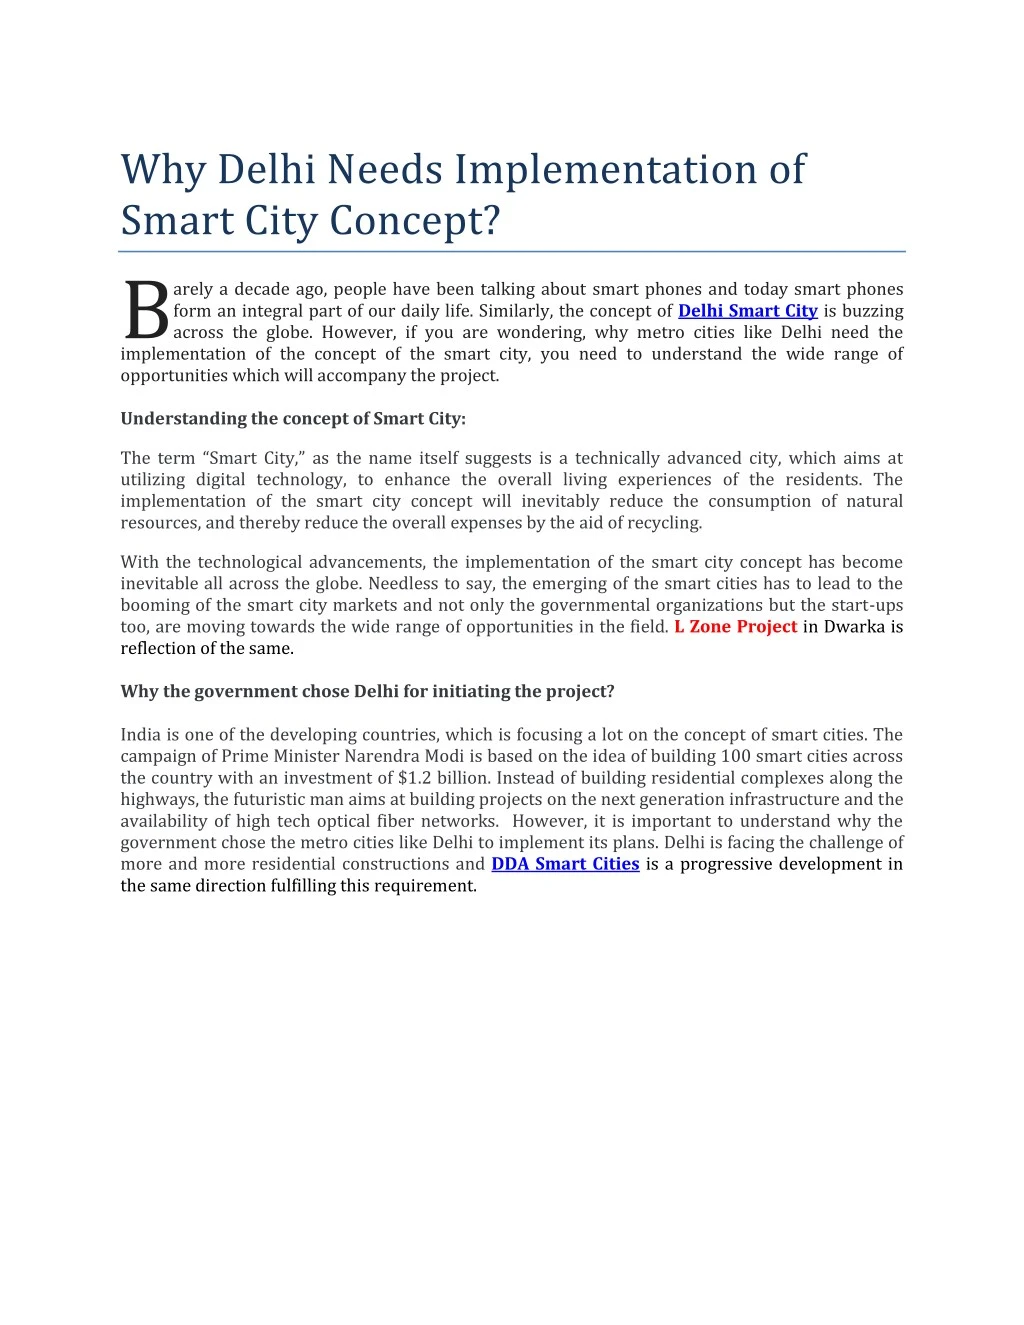 why delhi needs implementation of smart city